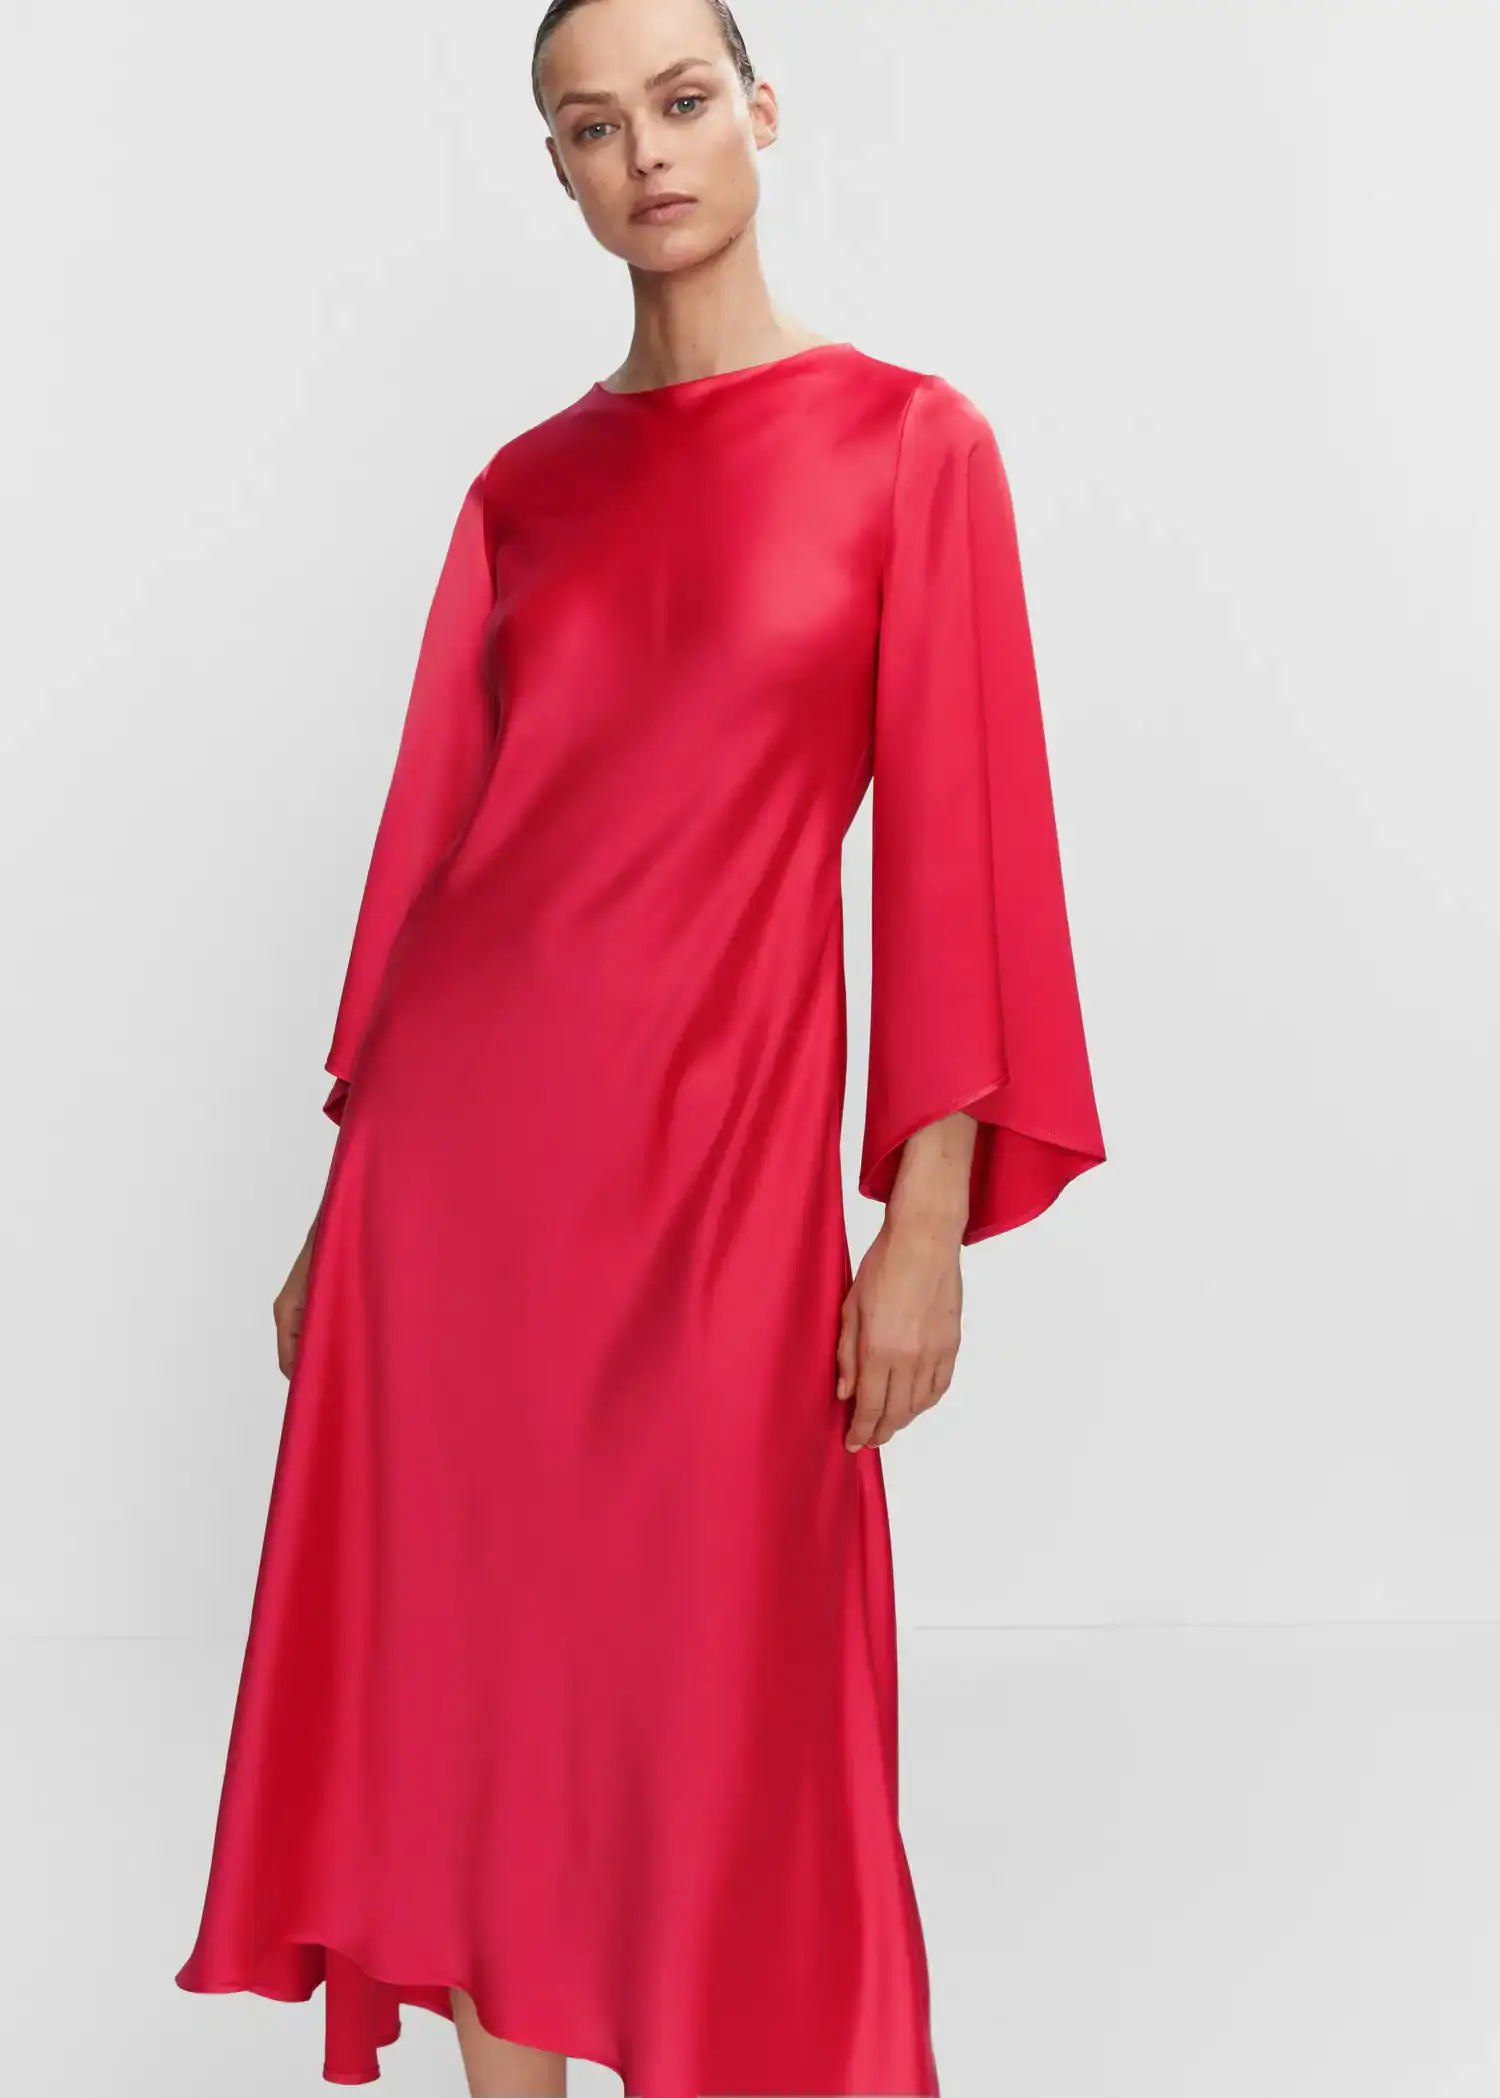 Mango Flared-sleeve satin dress. a woman wearing a red dress standing next to a white wall. 